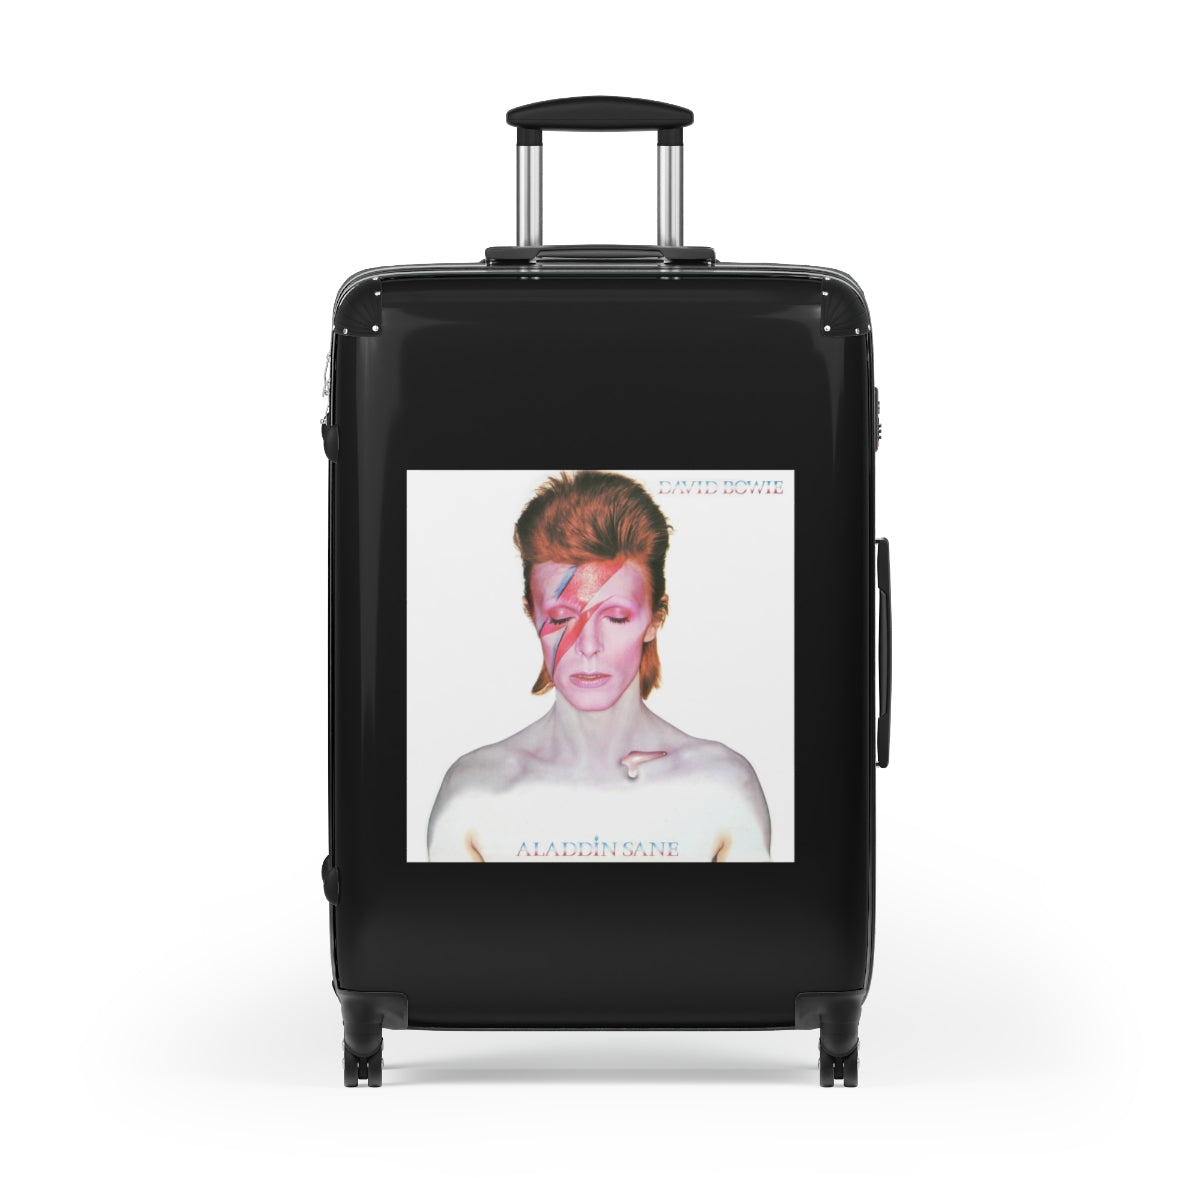 Getrott David Bowie Aladdin Sane 1973 Black Cabin Suitcase Inner Pockets Extended Storage Adjustable Telescopic Handle Inner Pockets Double wheeled Polycarbonate Hard-shell Built-in Lock